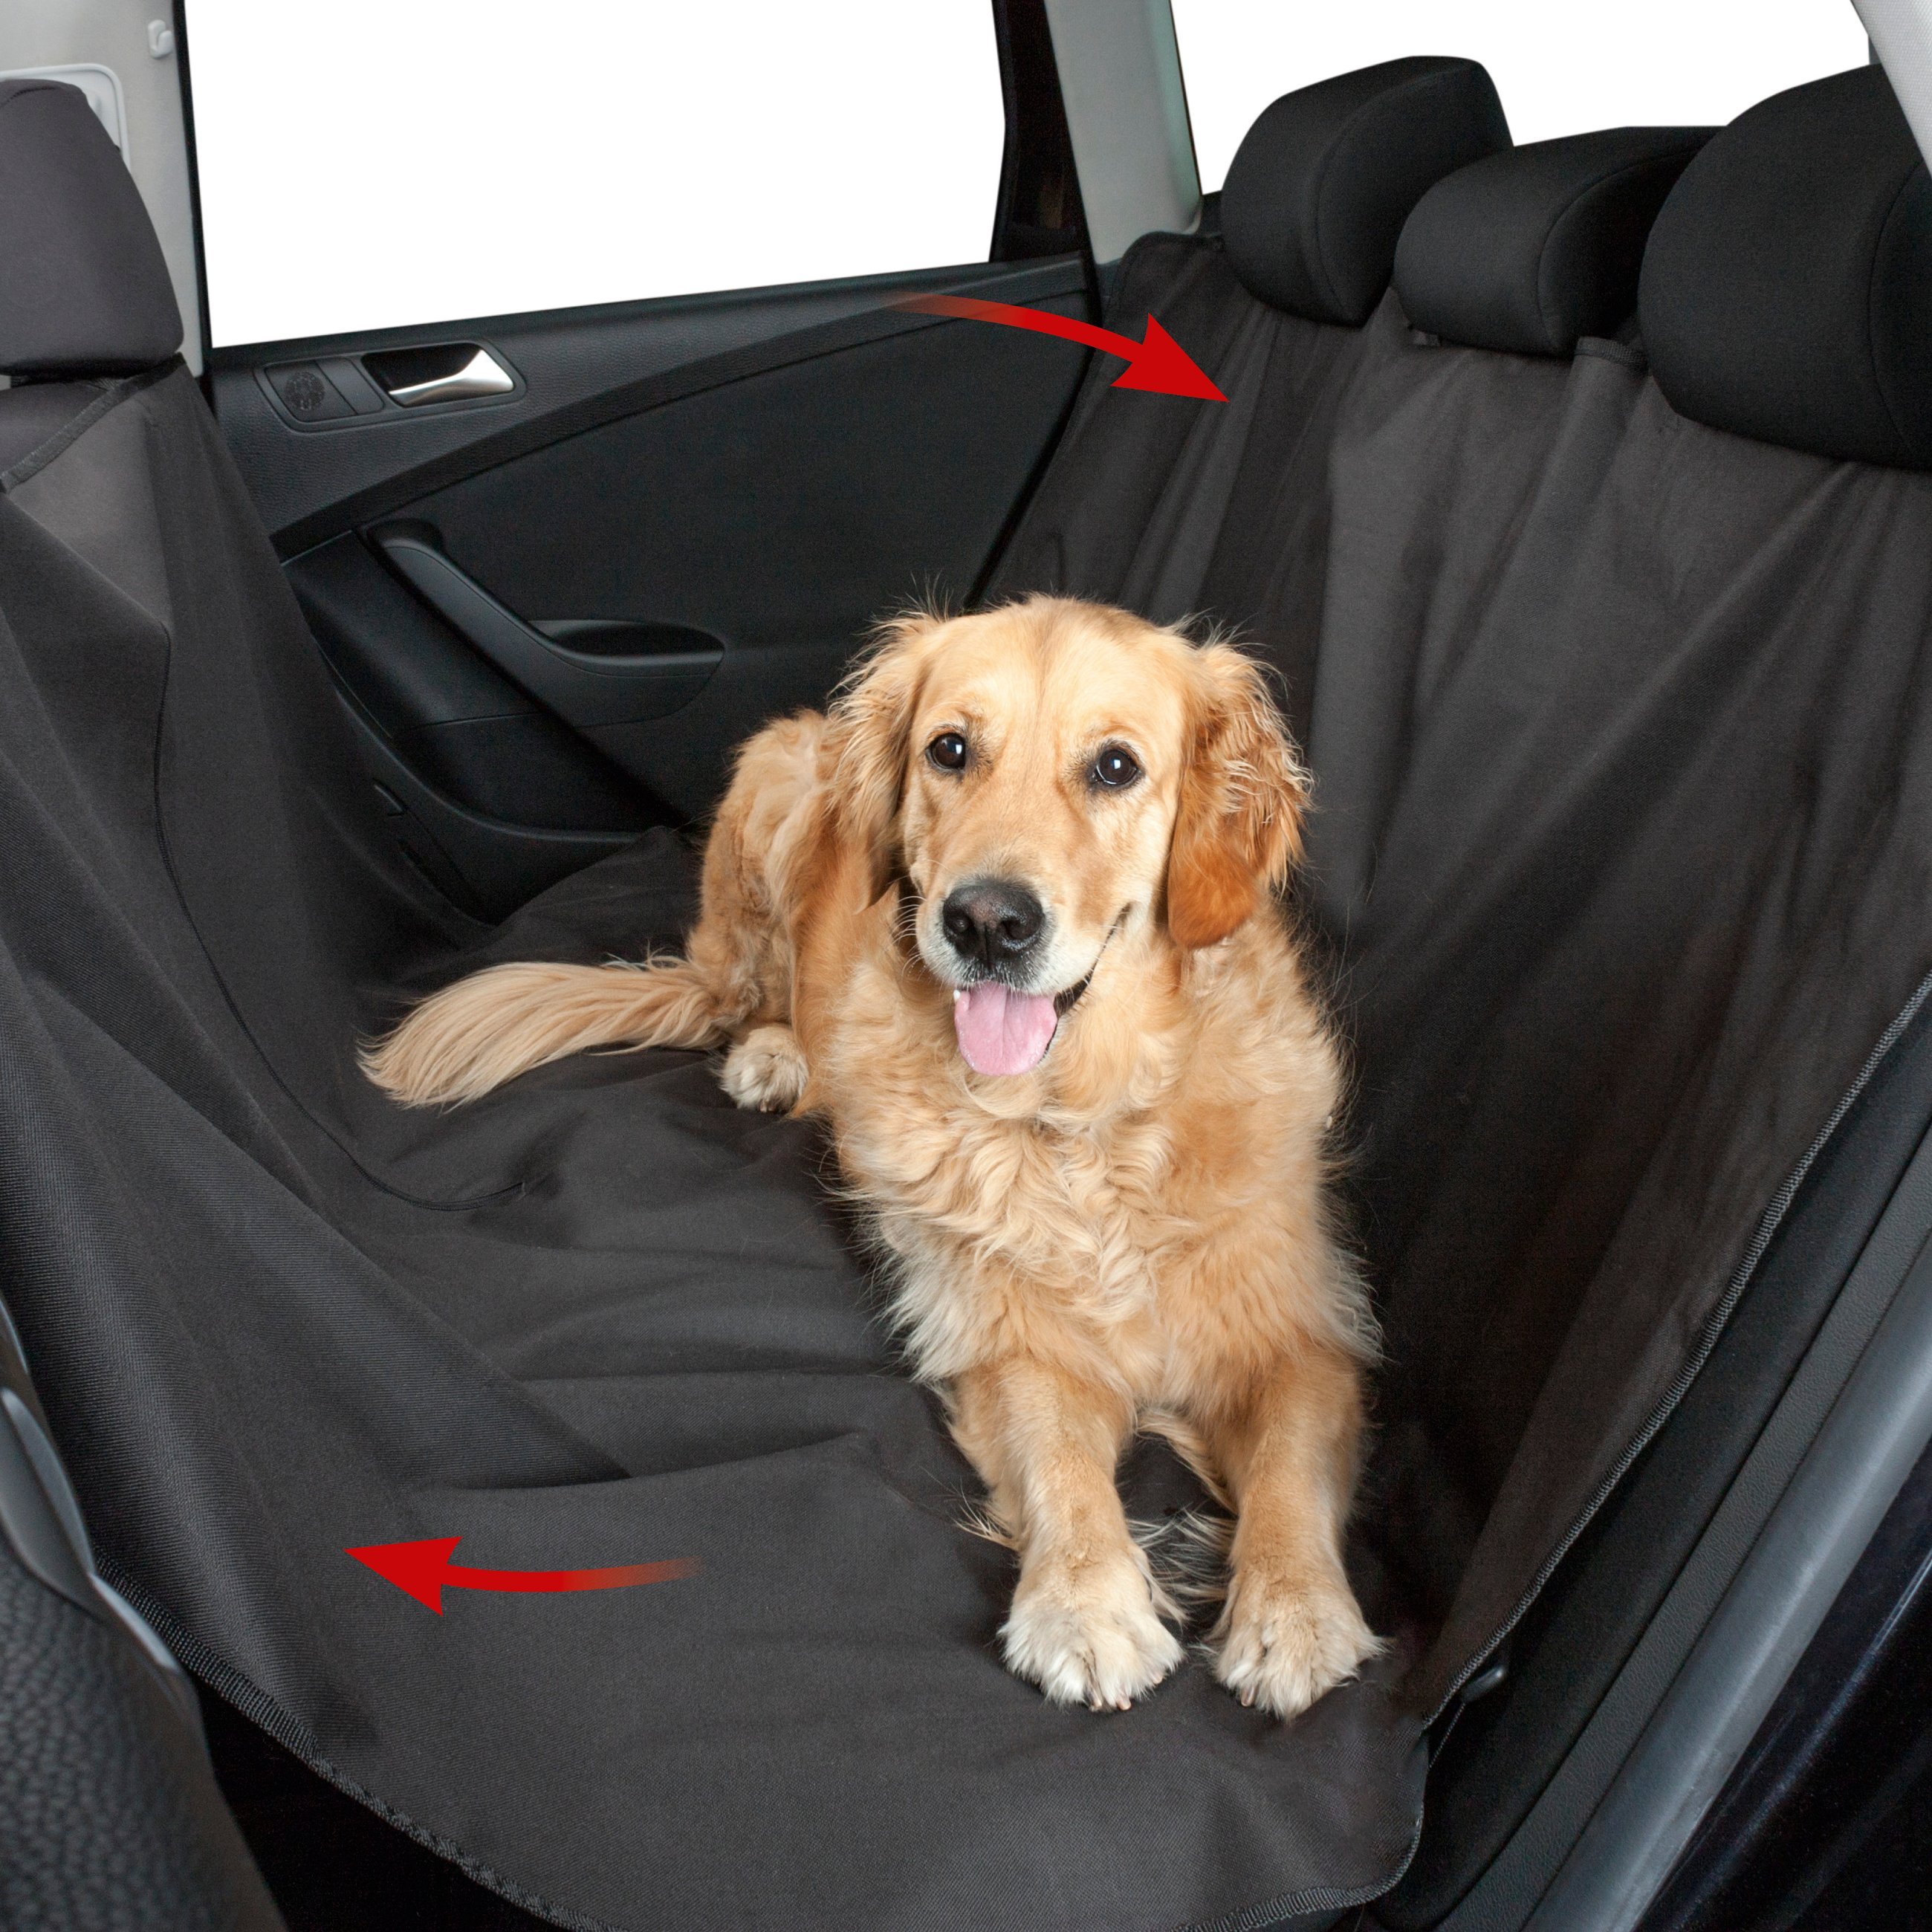 Rear car seat protective cover, Nero dog blanket